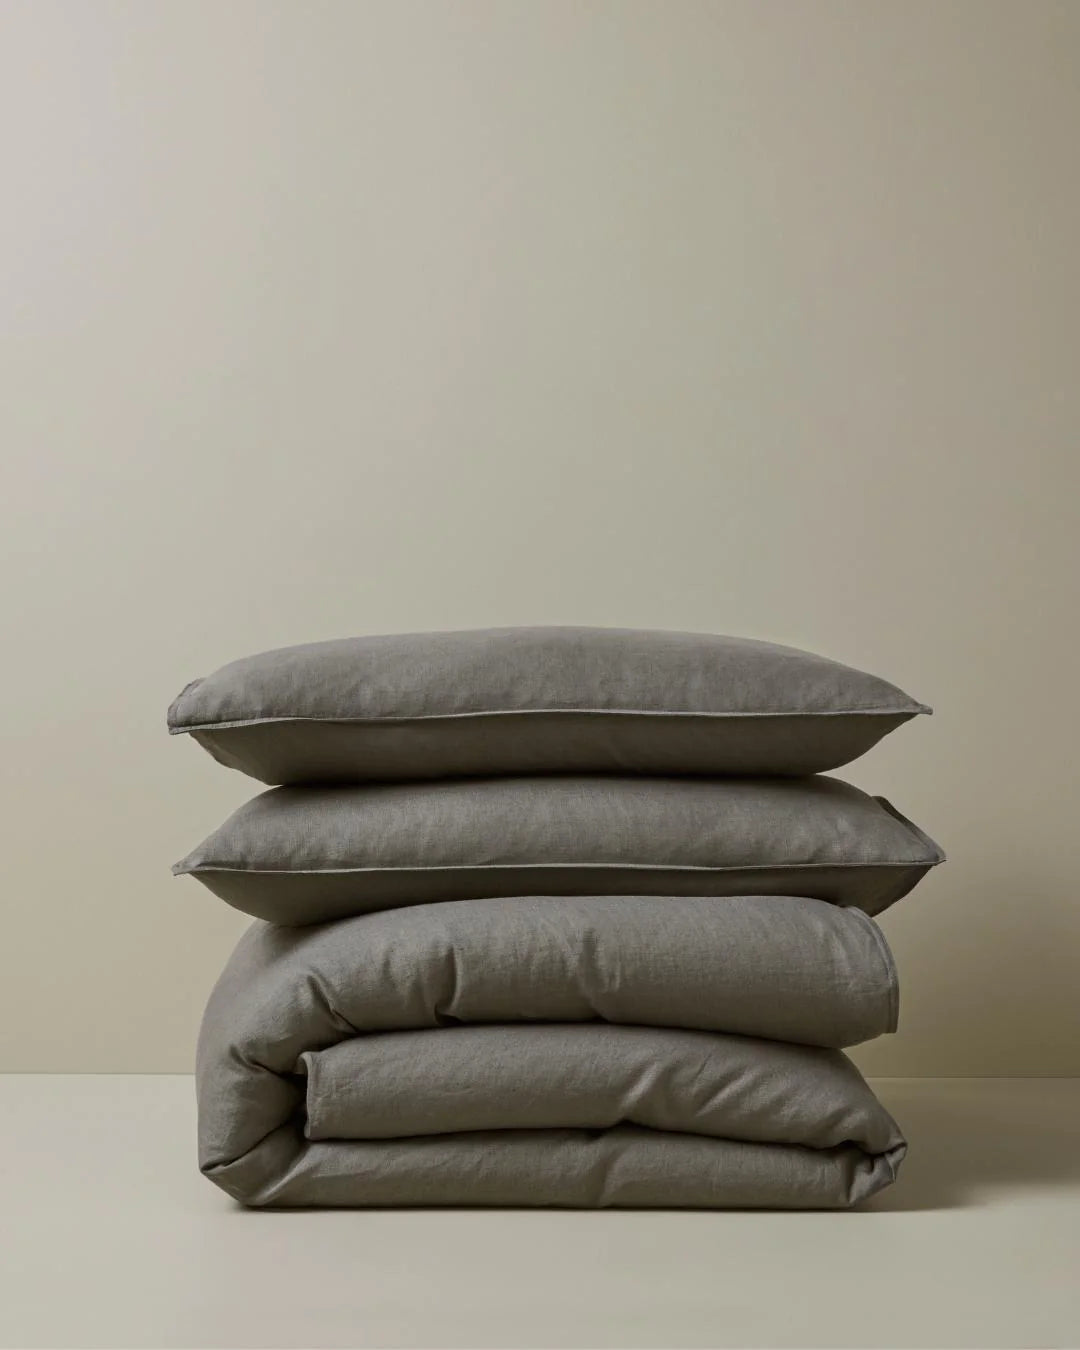 Ravello French flax linen duvet cover charcoal